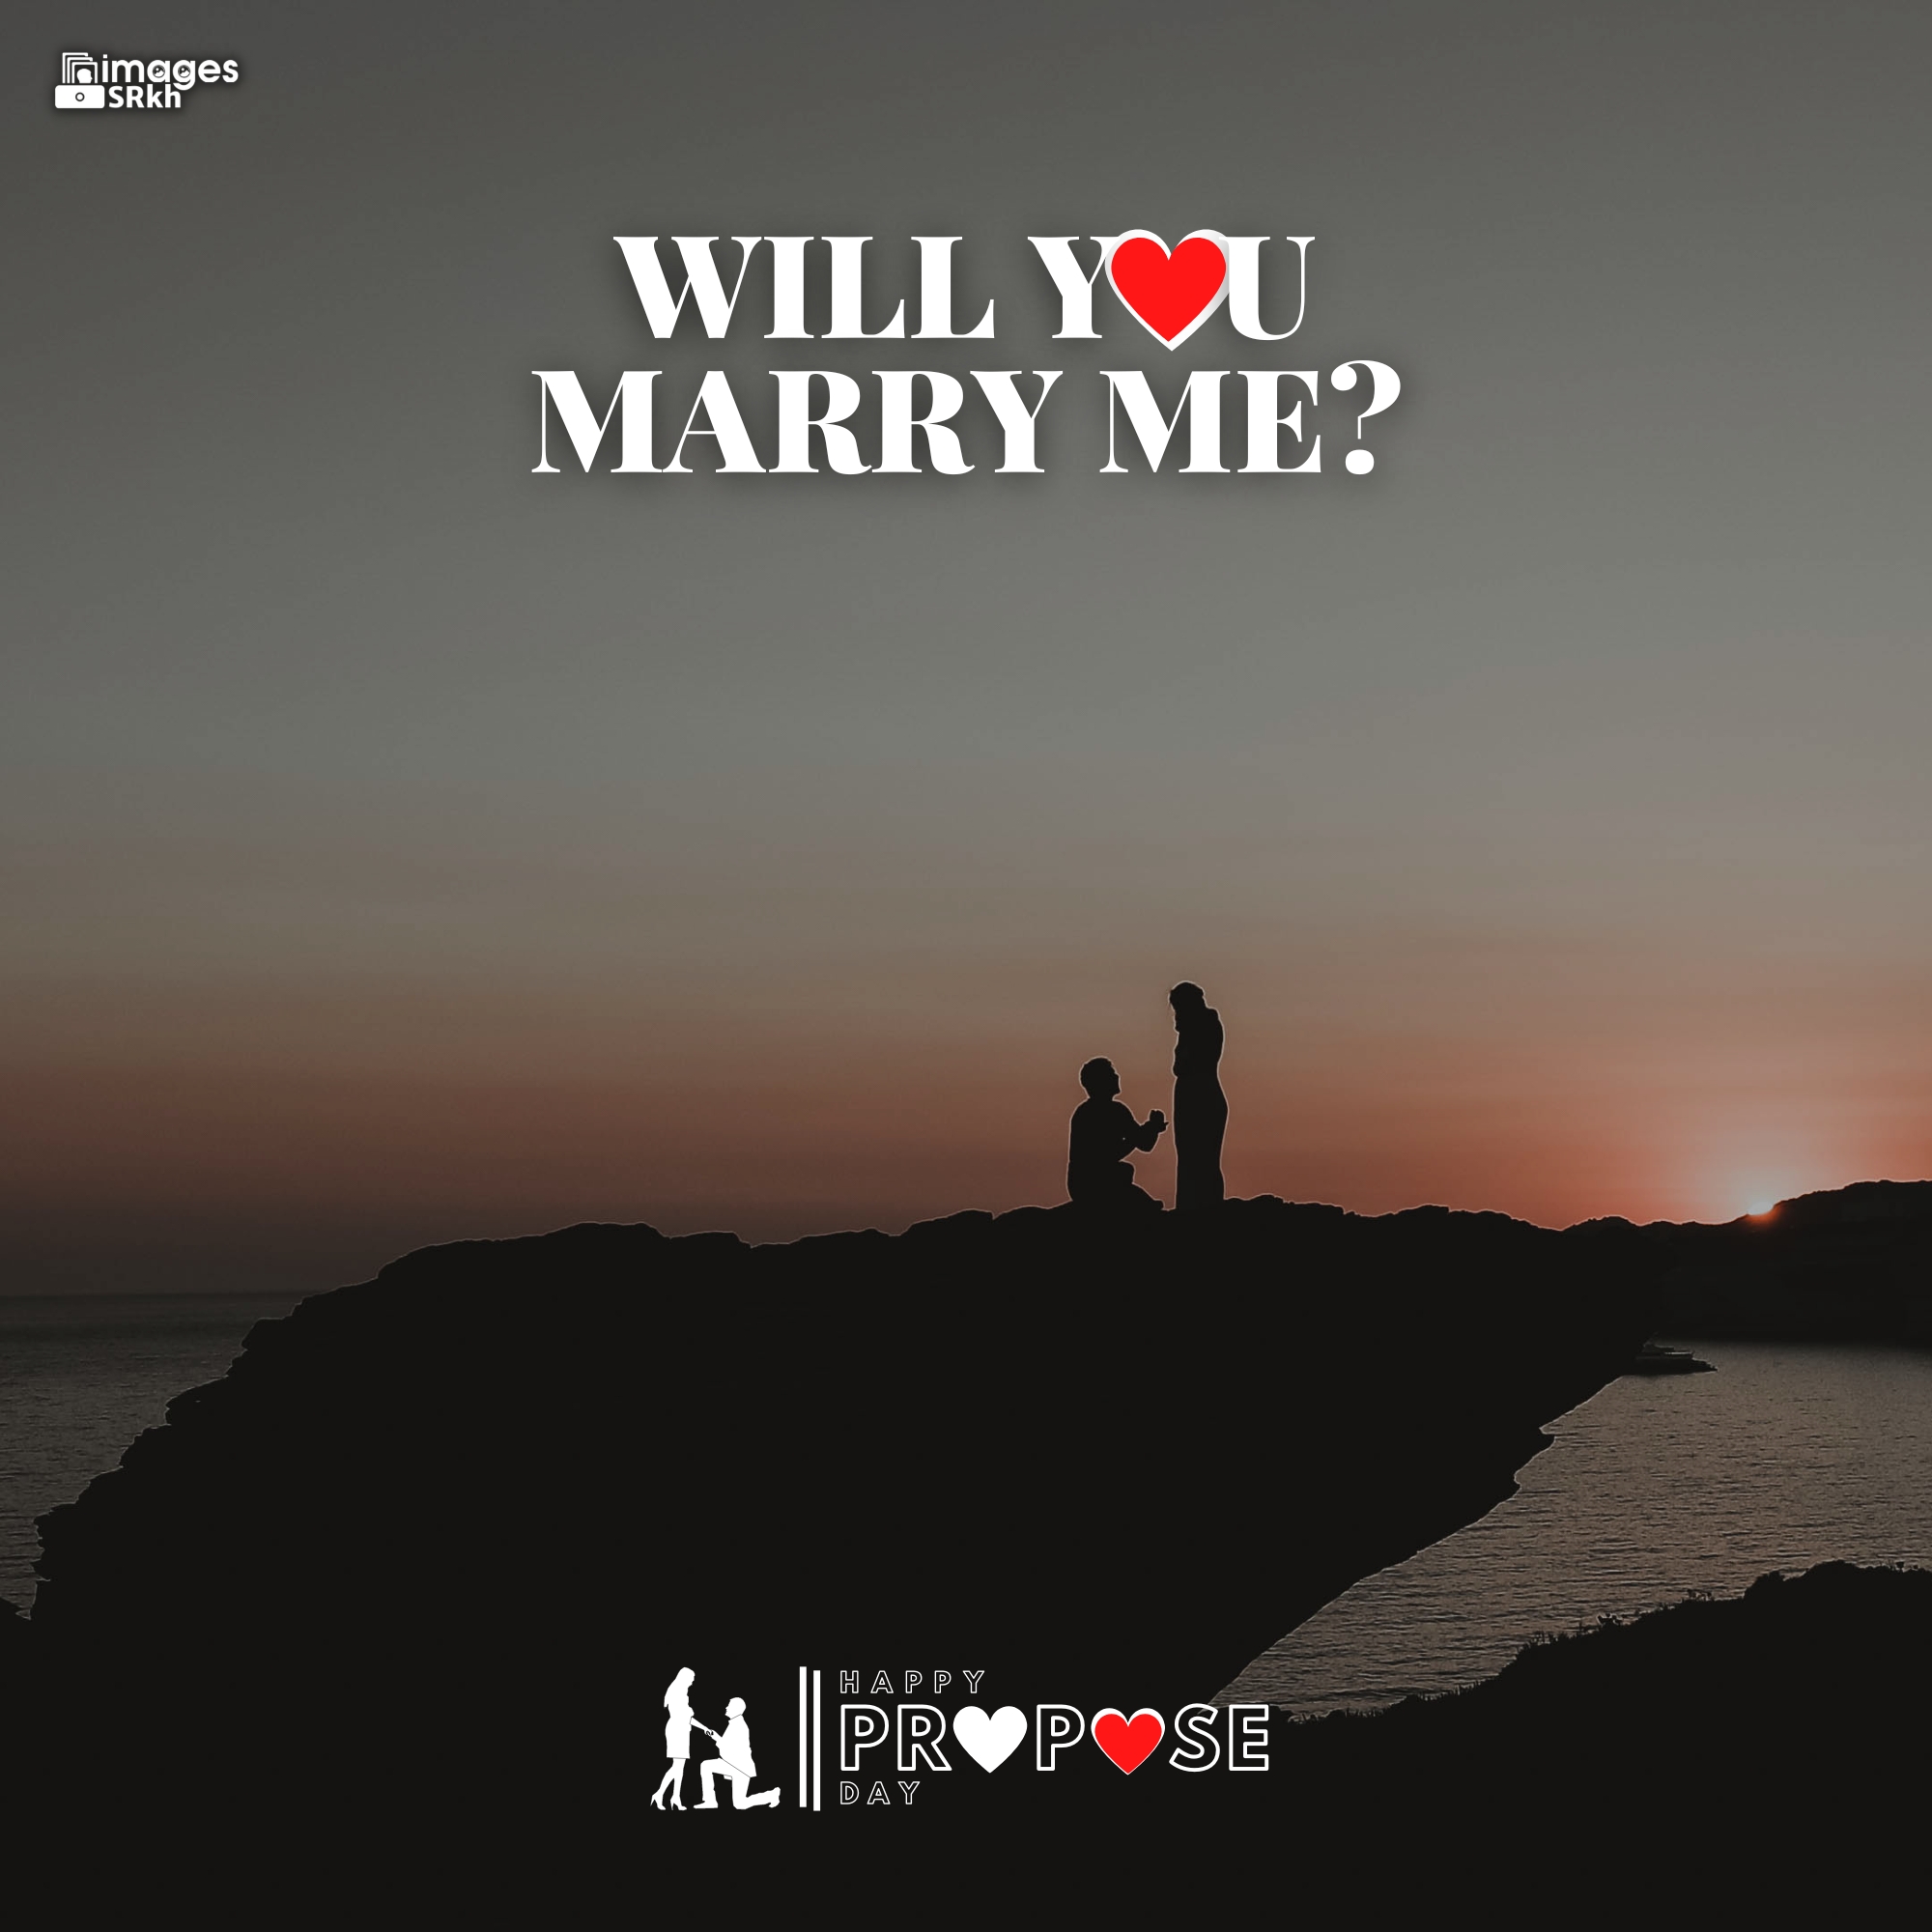 Propose Day Images | 298 | Will You MARRY ME